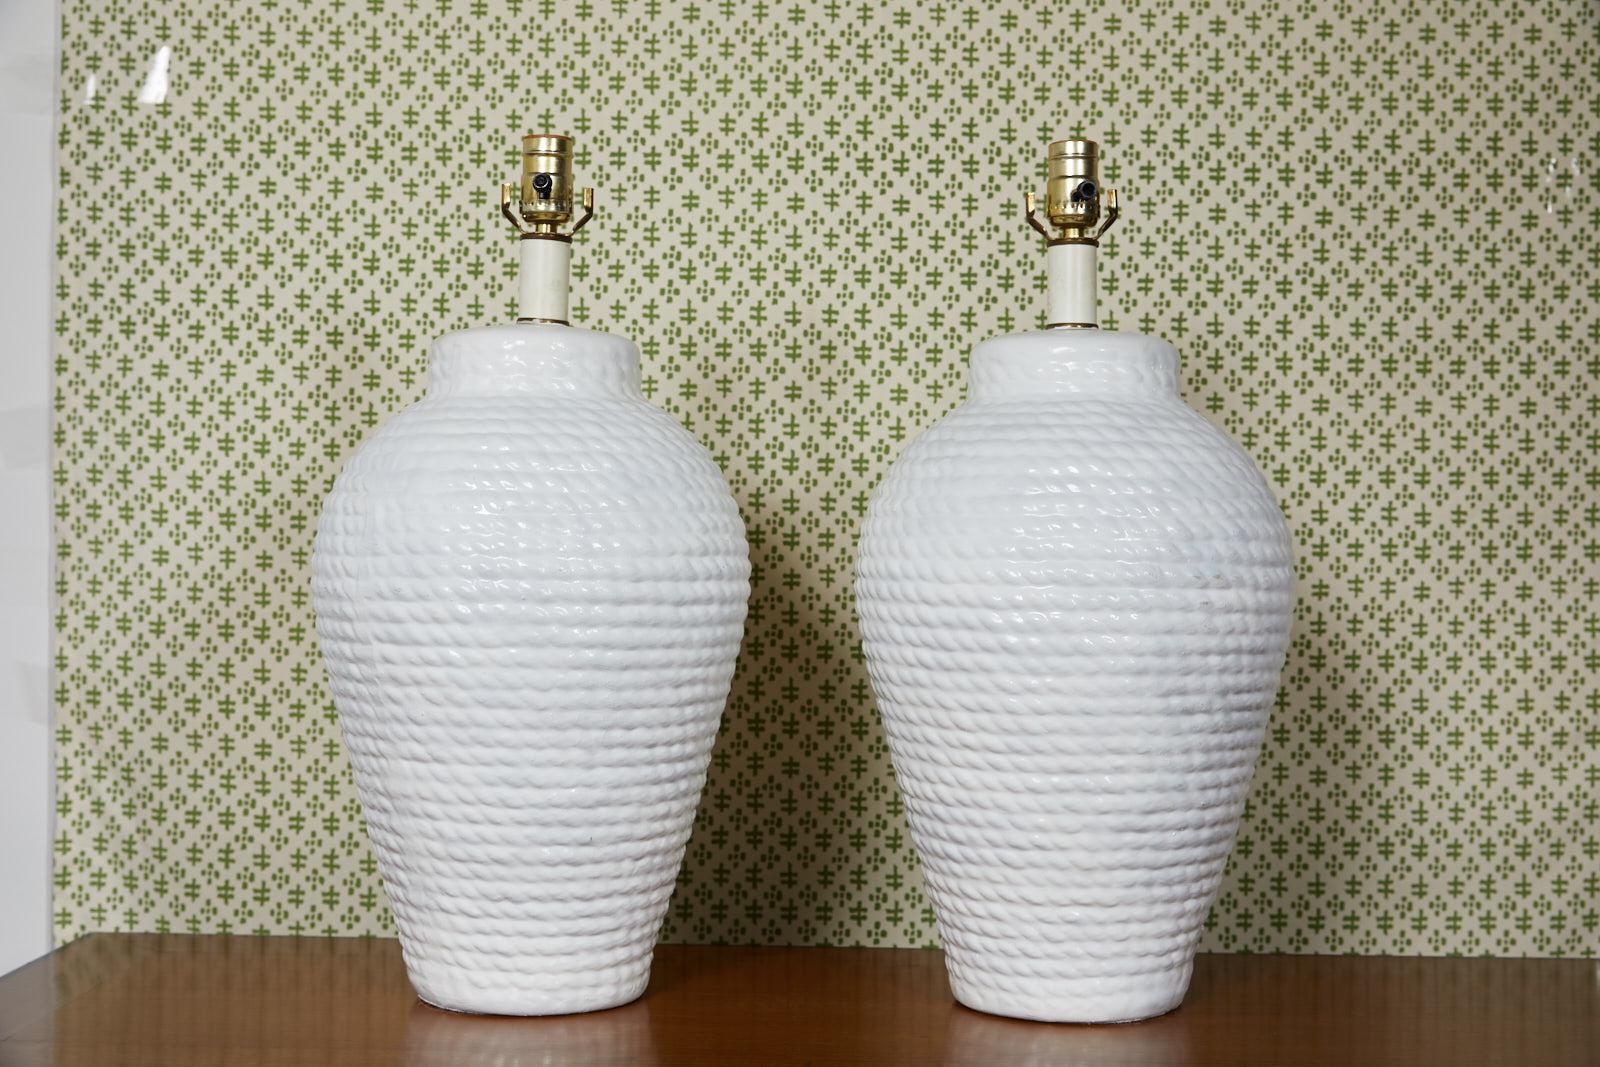 Mid-20th century pair of white ceramic table lamps shaped like urns and having a cast rope motif. They are created in the style of Hollywood Regency.